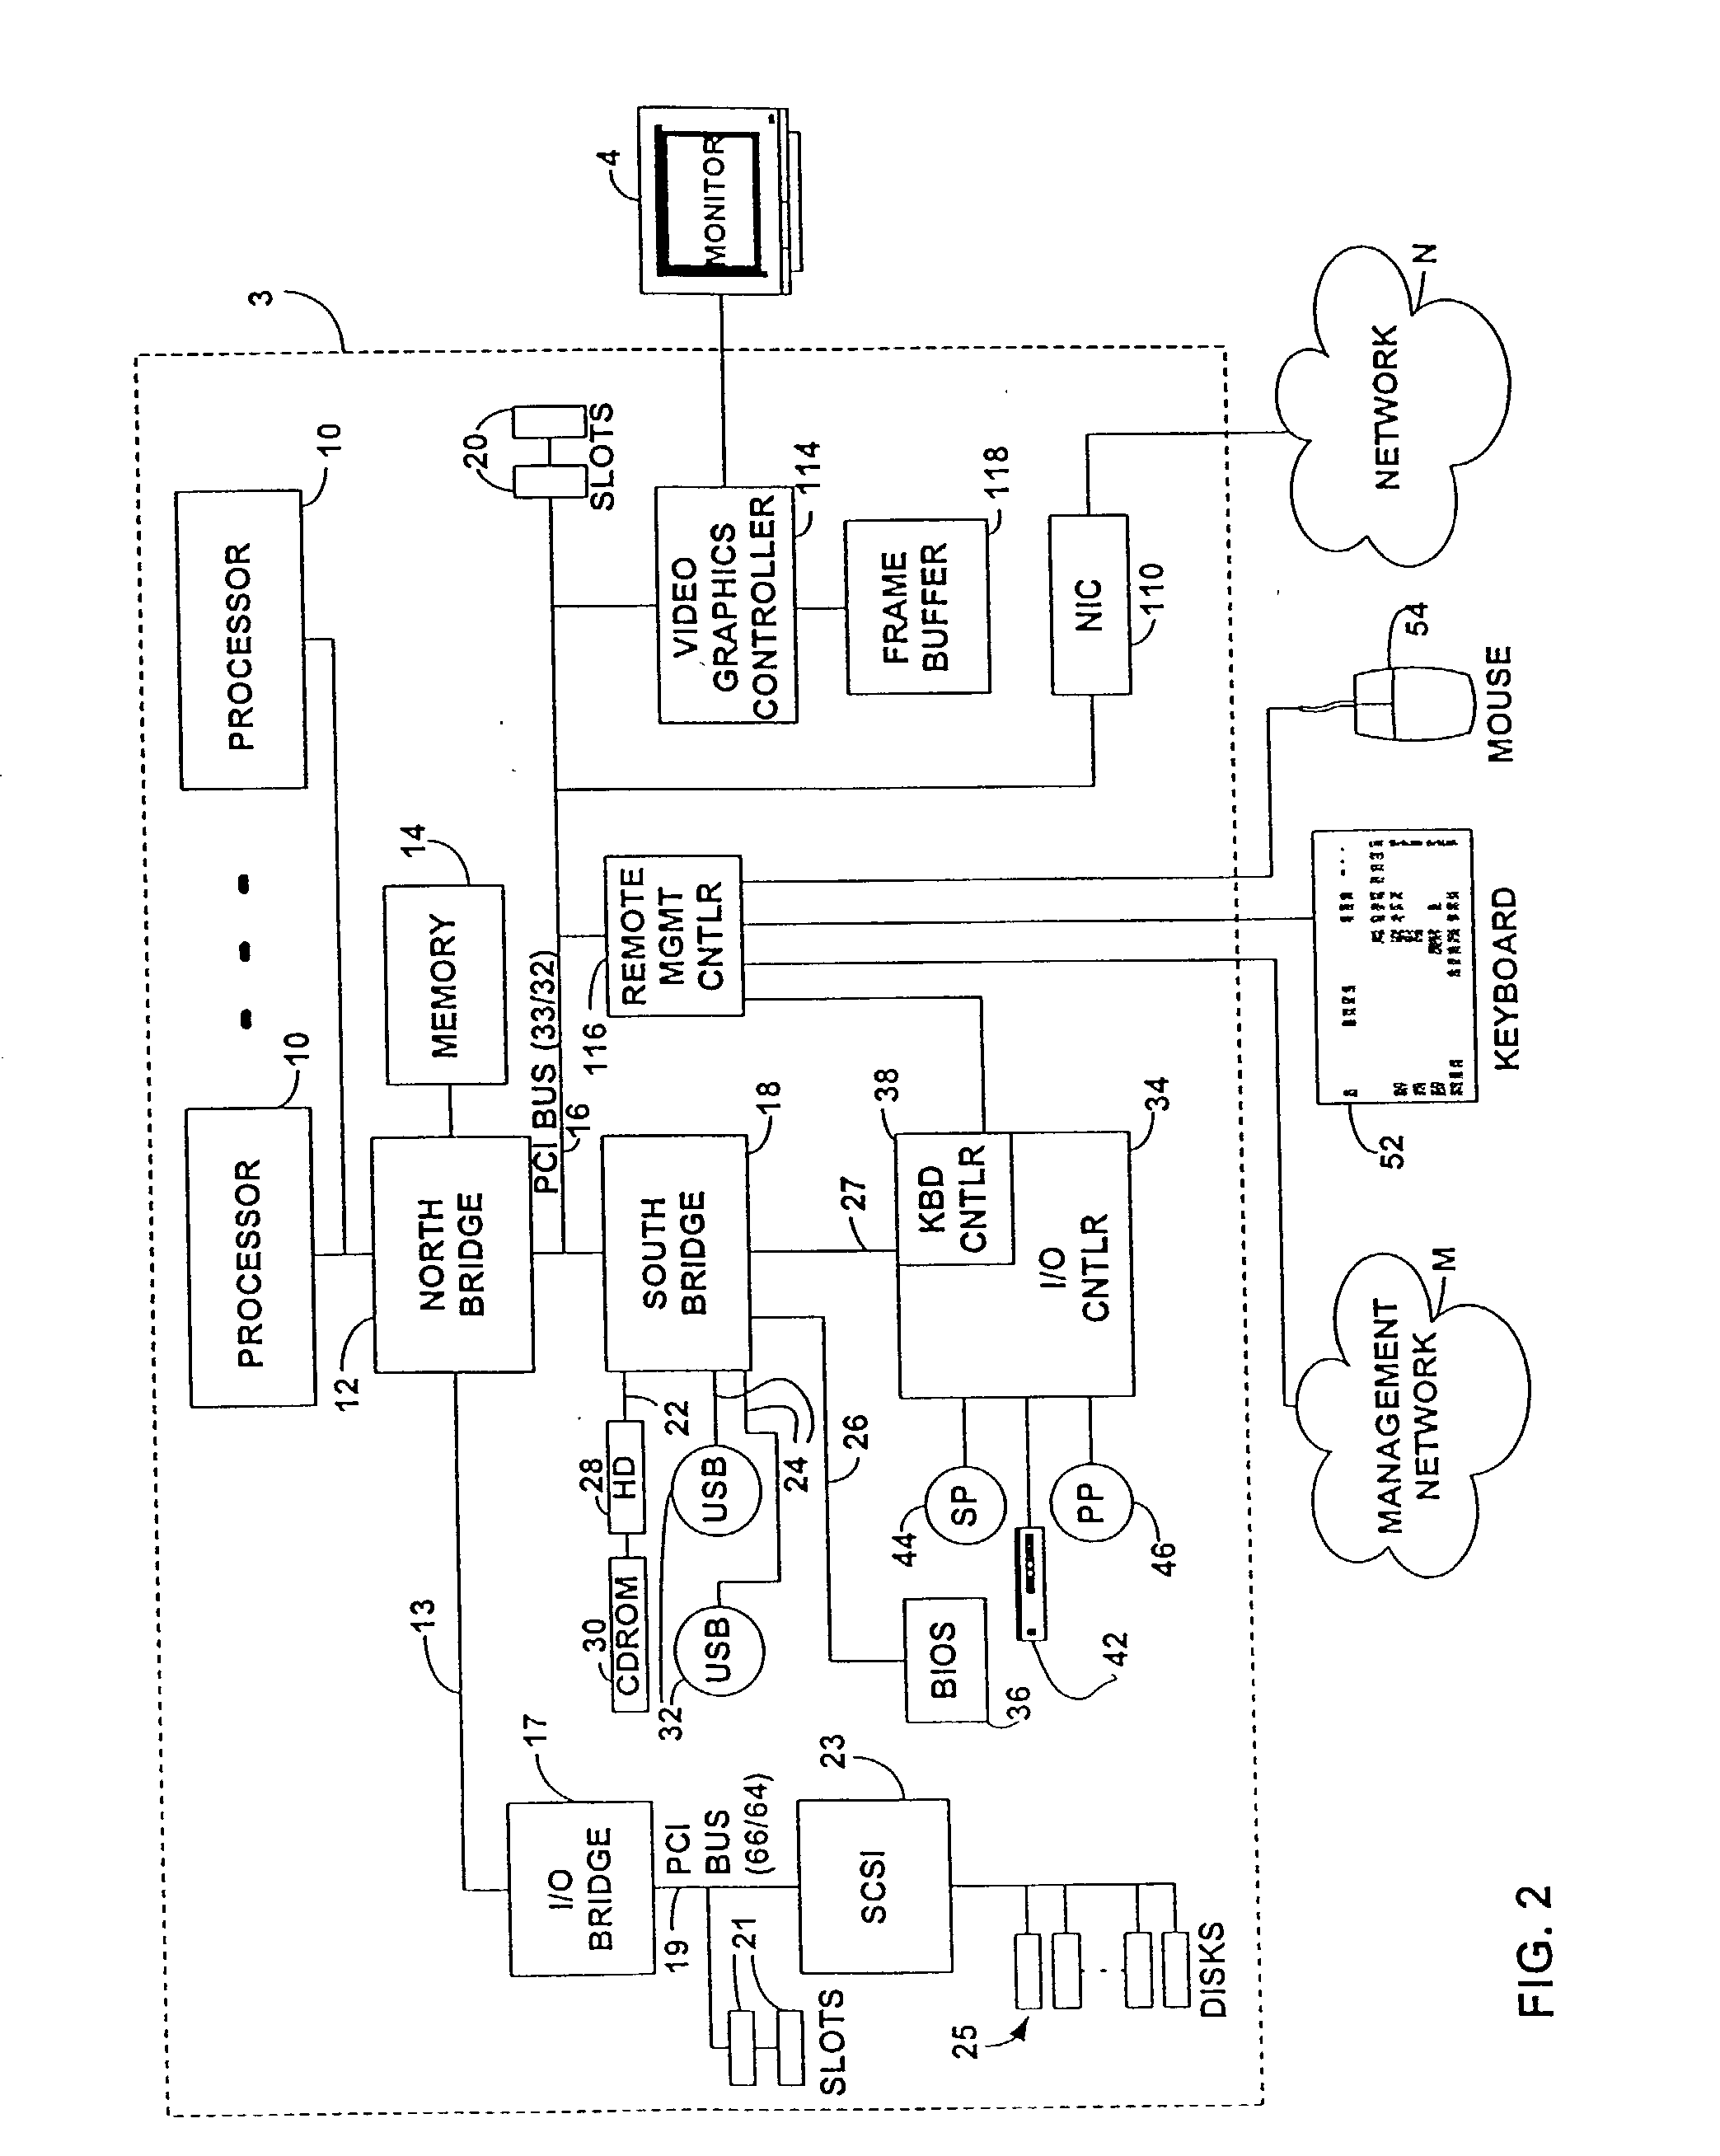 Method and apparatus for configuring security options in a computer system